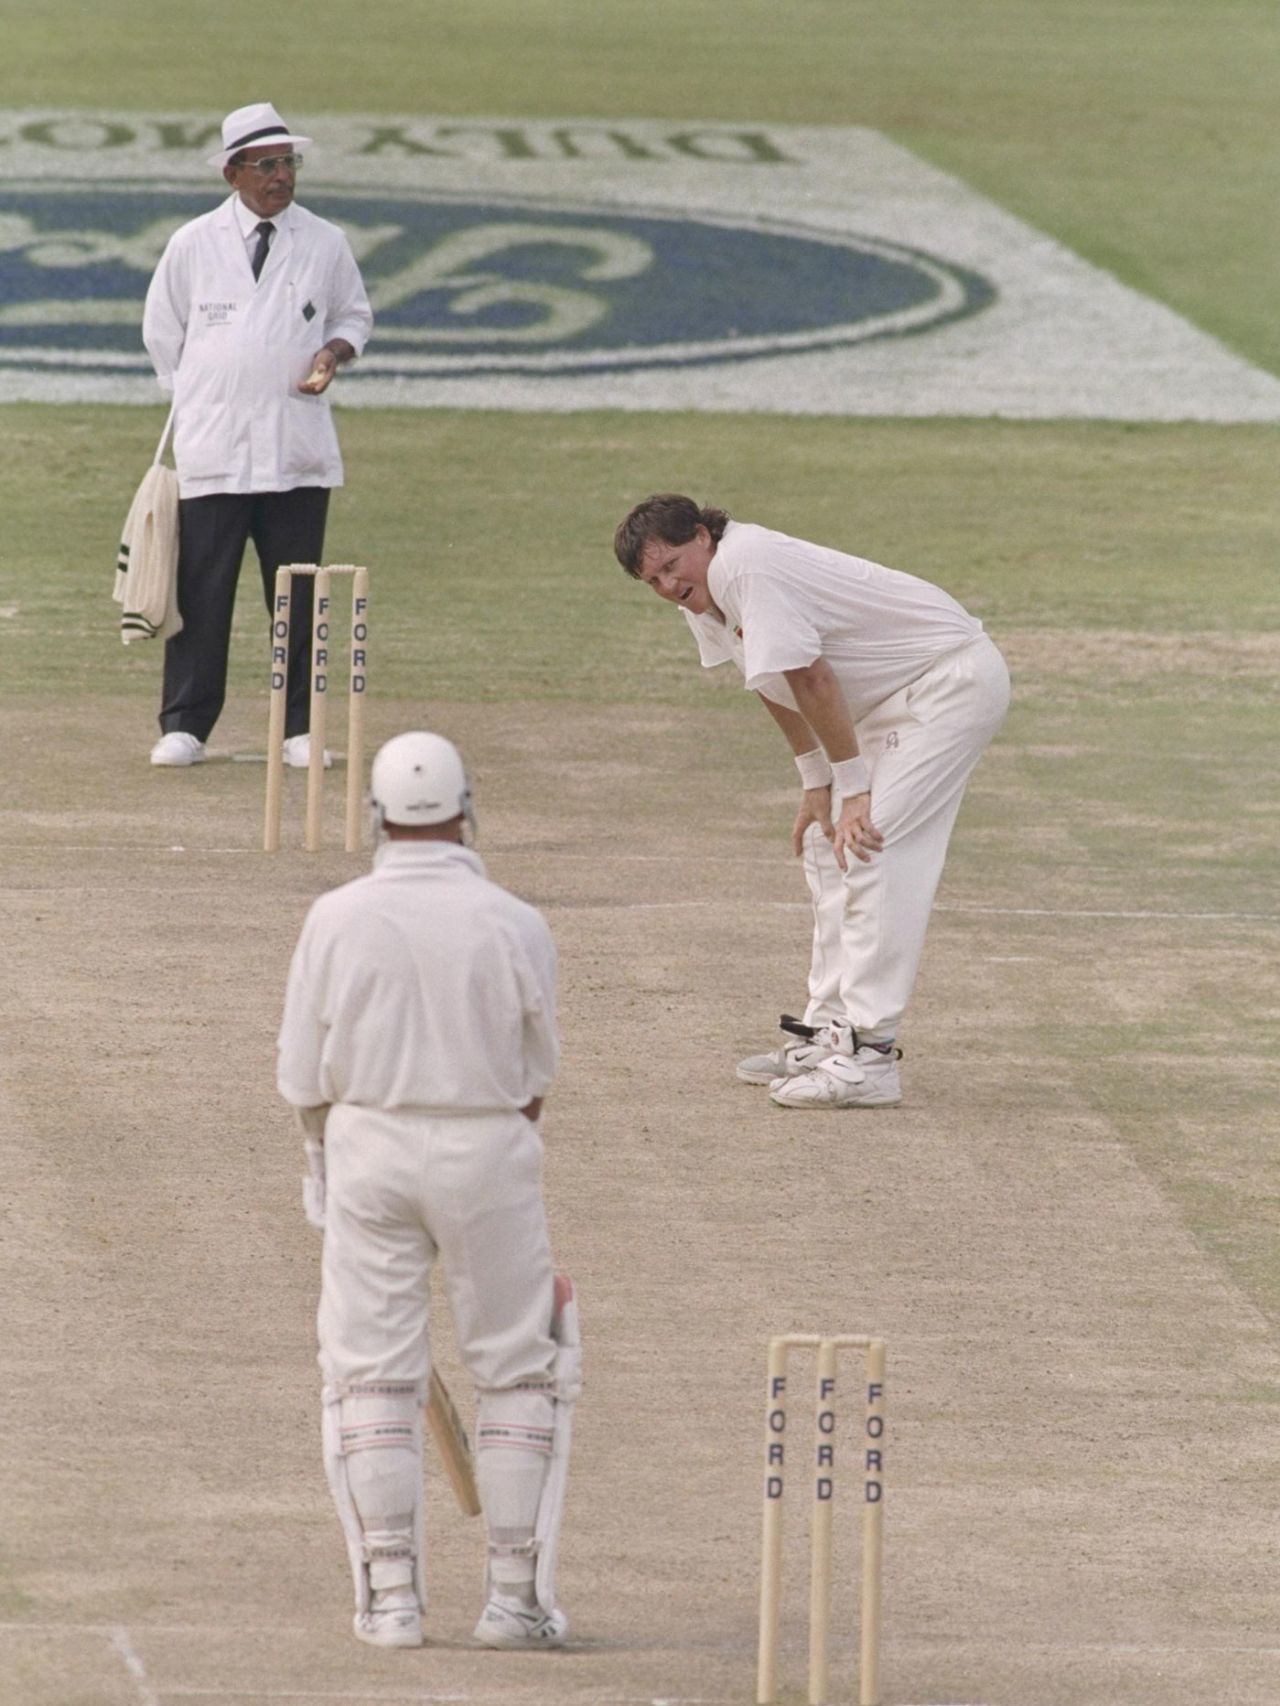 Eddo Brandes bends with his hands on his knees after an appeal was turned down, Zimbabwe v England, second Test, day three, Harare, December 28, 1996